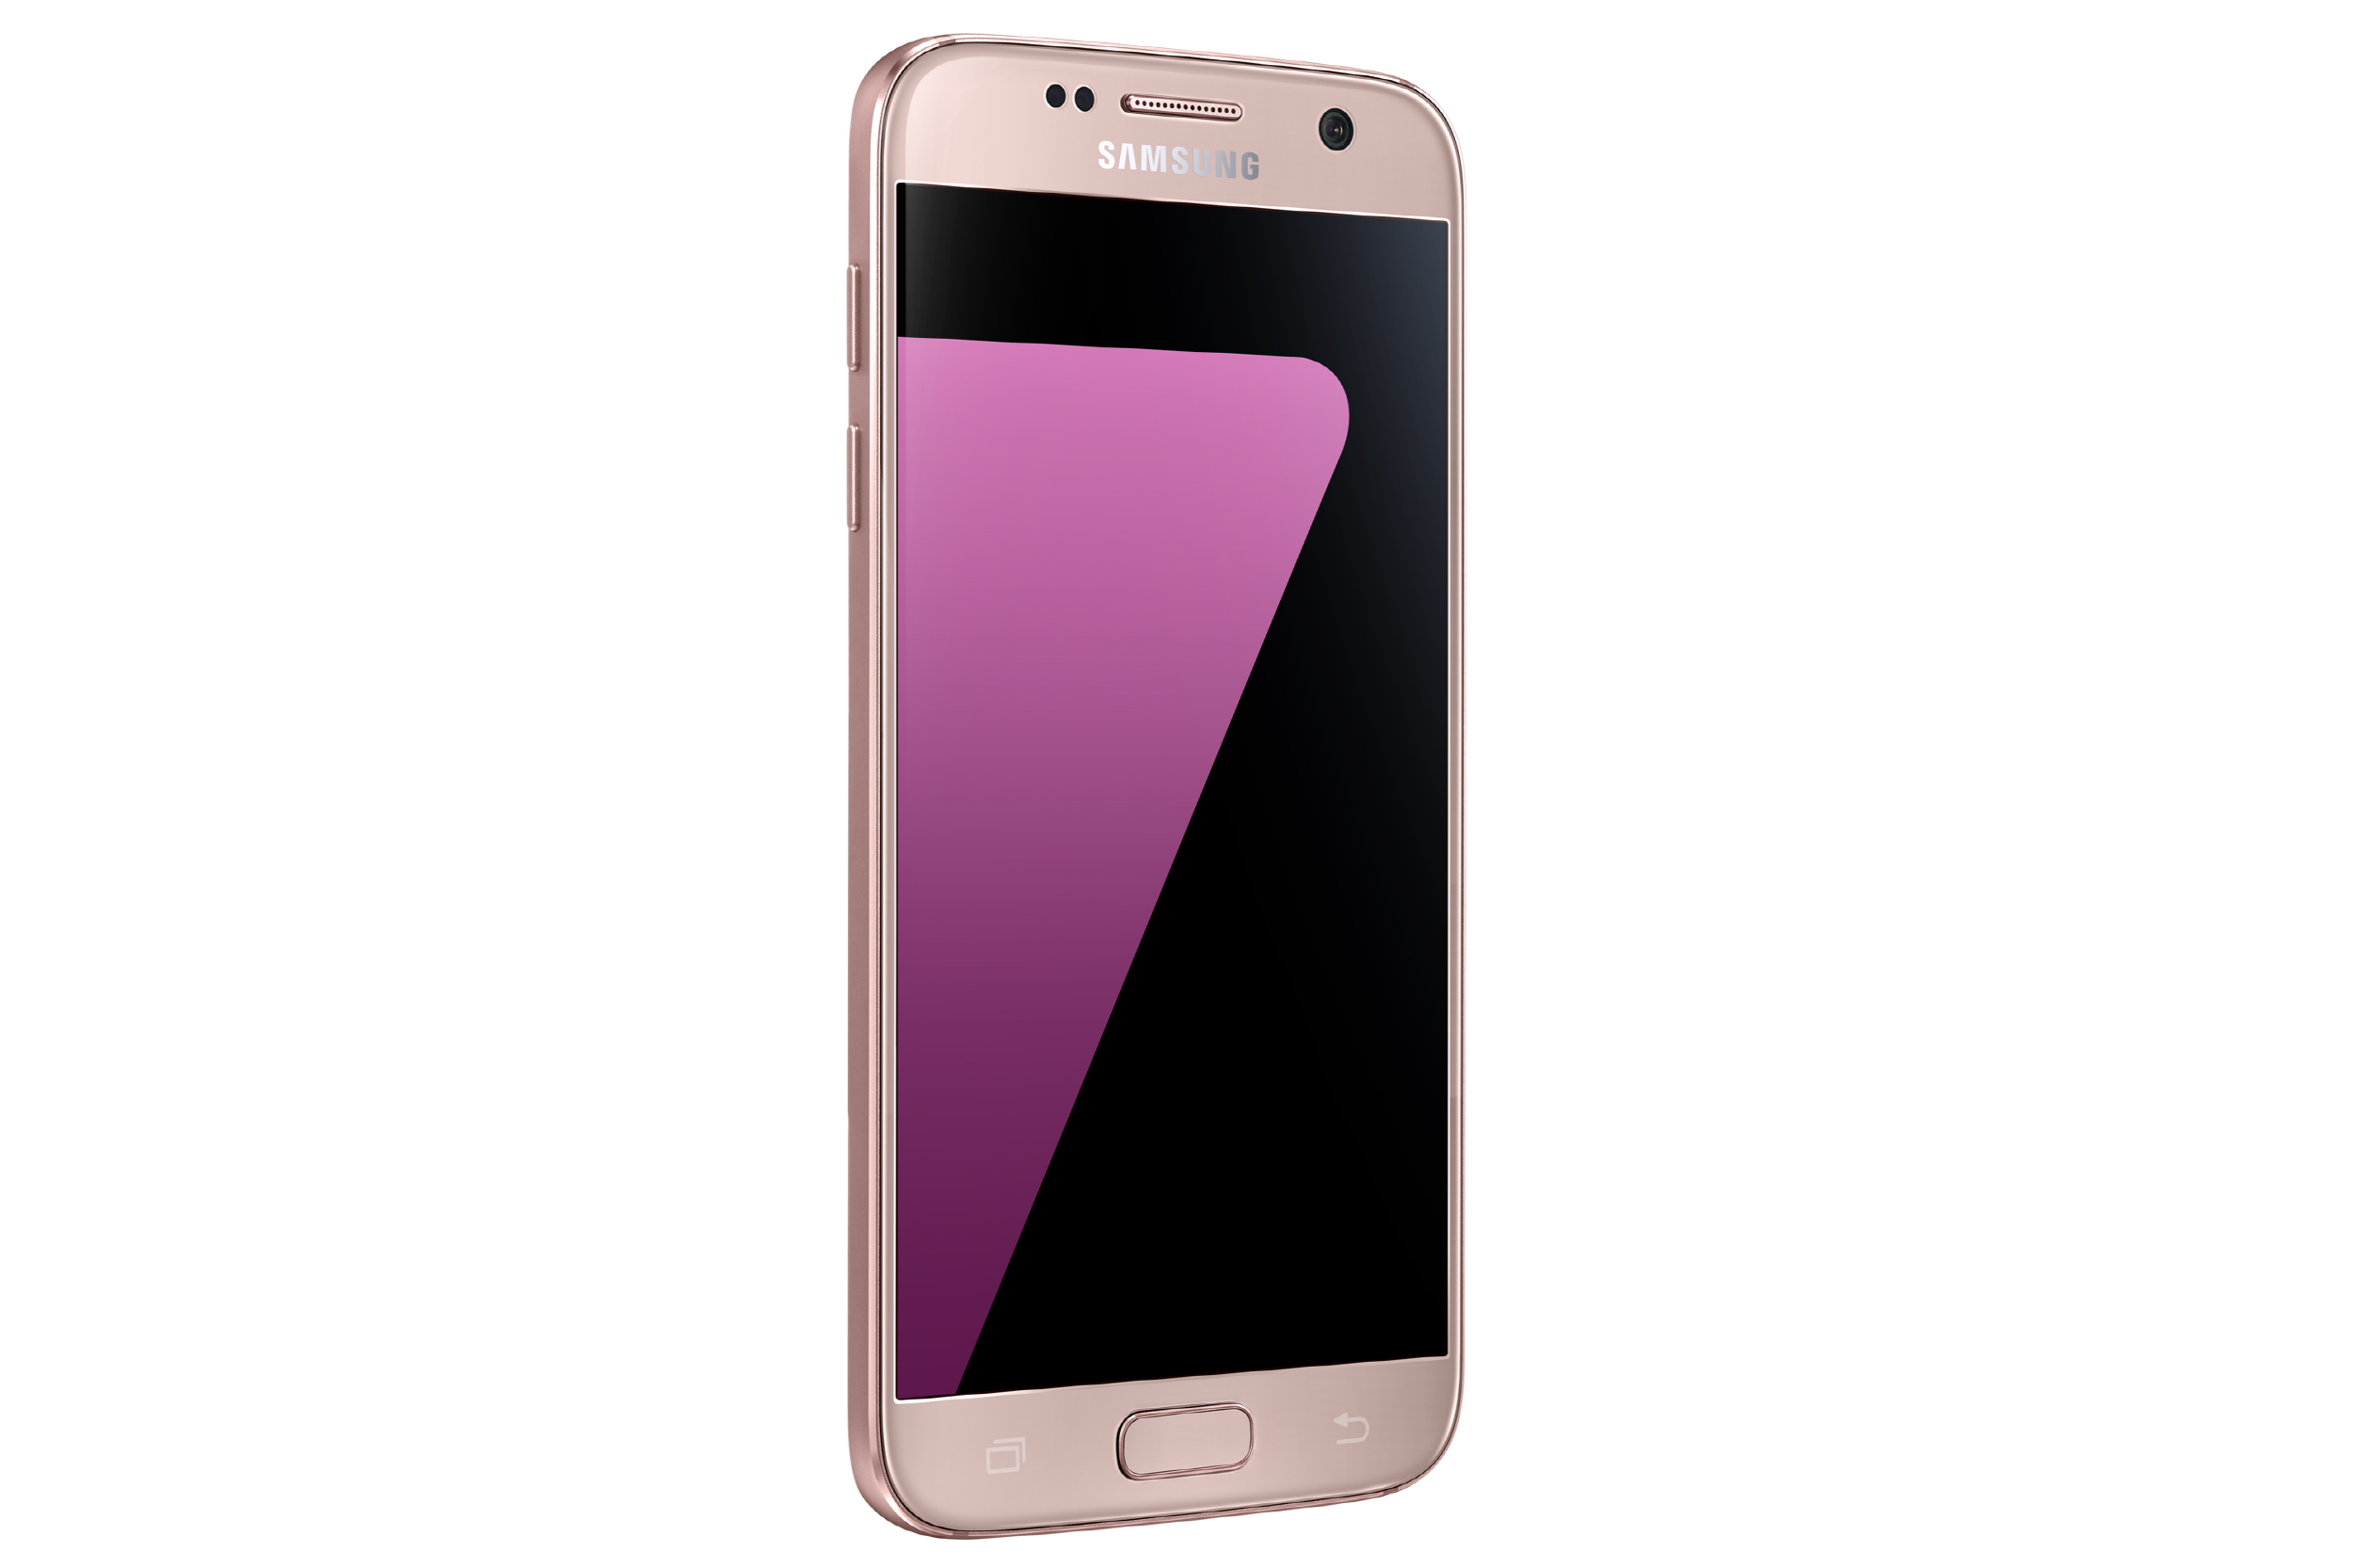 Galaxy S7 S7 edge Now Available in Pink Gold - Samsung Newsroom Global Media Library